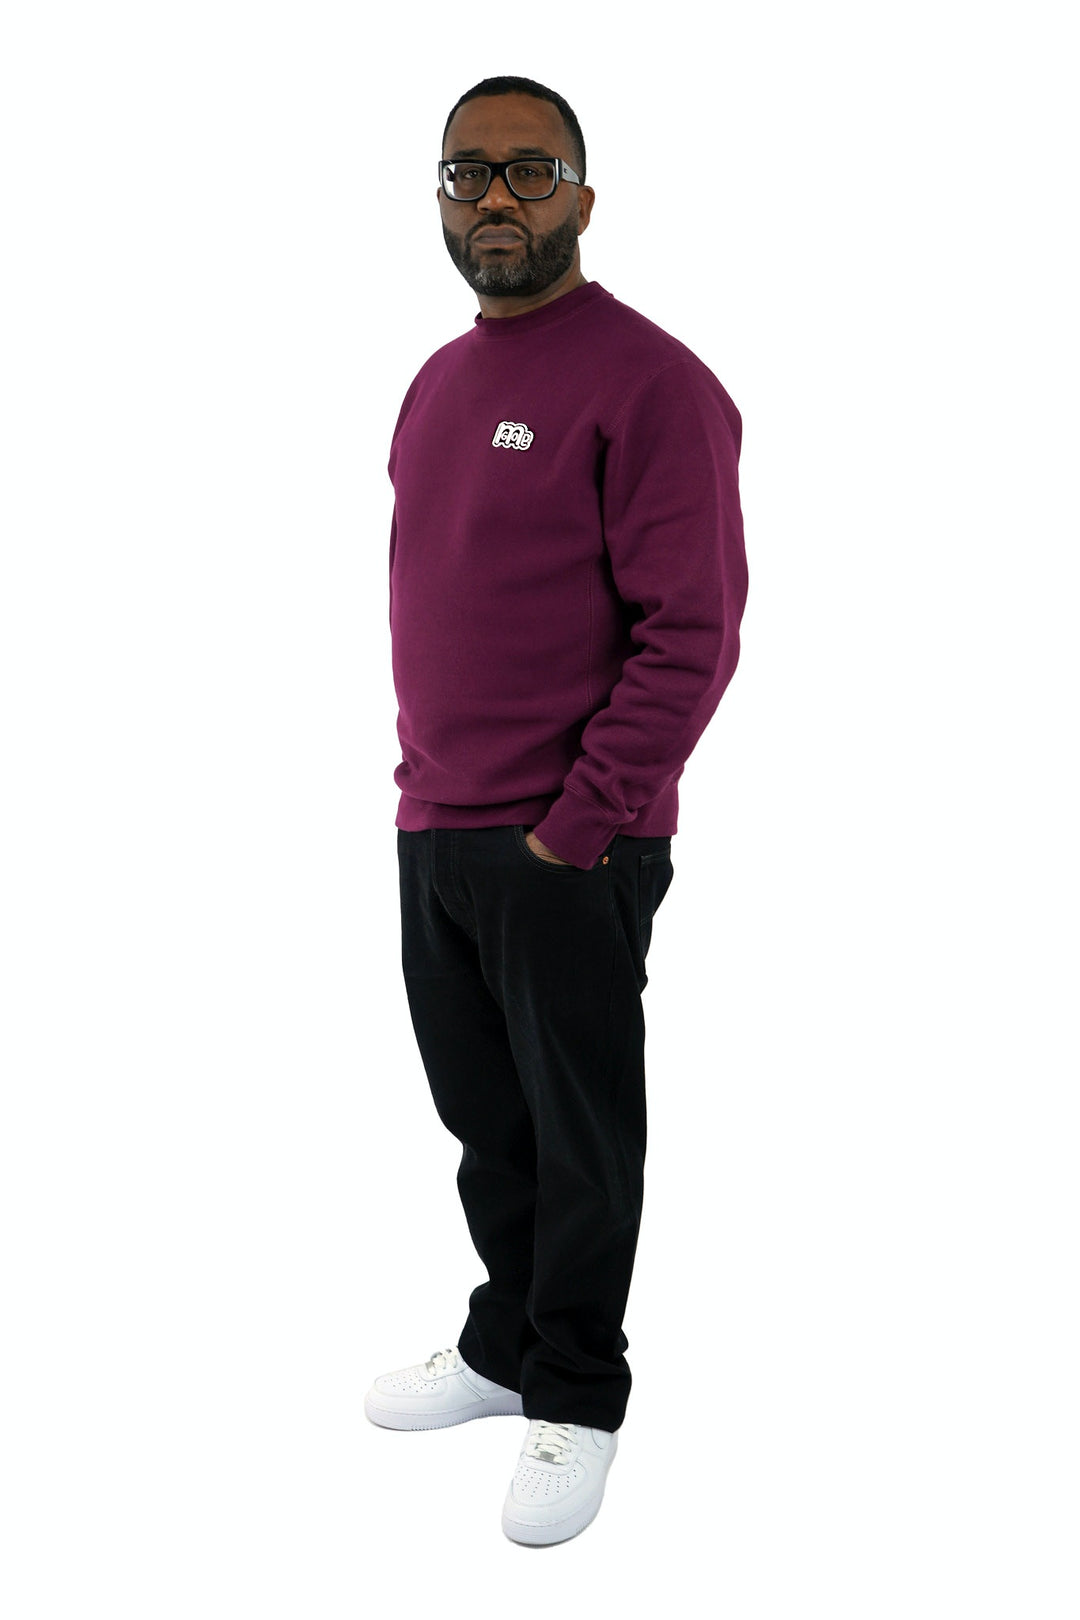 Luxury Maroon Crewneck with premium cross grain design to ensure long-lasting comfort and wear. Featuring logo at left front and GODinme on the back.